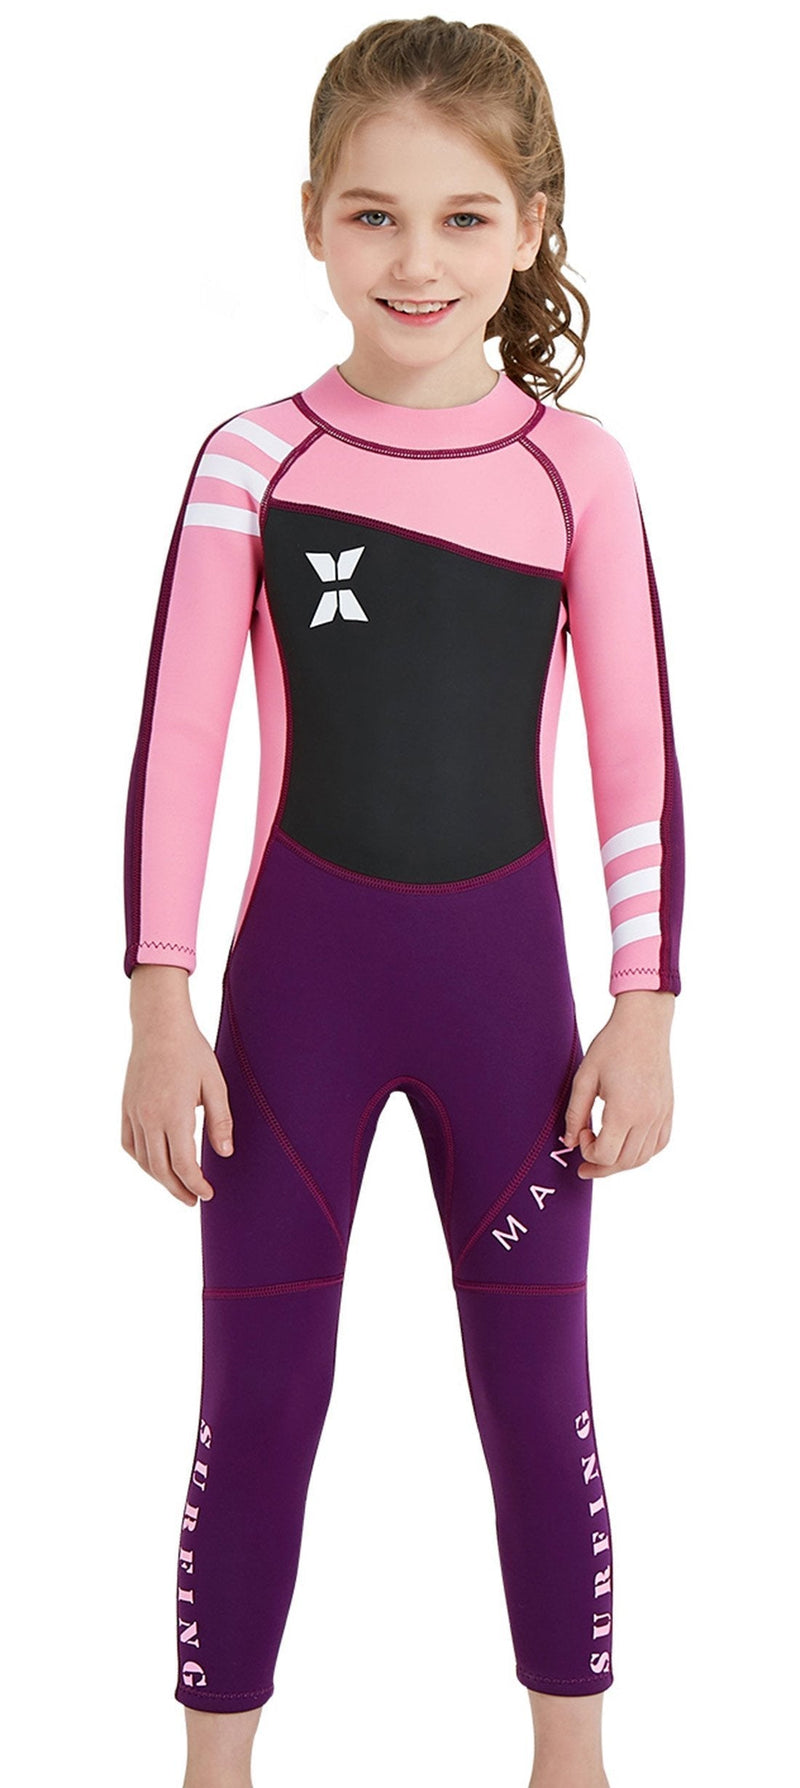 [AUSTRALIA] - DIVE & SAIL Kids 2.5mm Wetsuit Long Sleeve One Piece UV Protection Thermal Swimsuit Pink Medium 